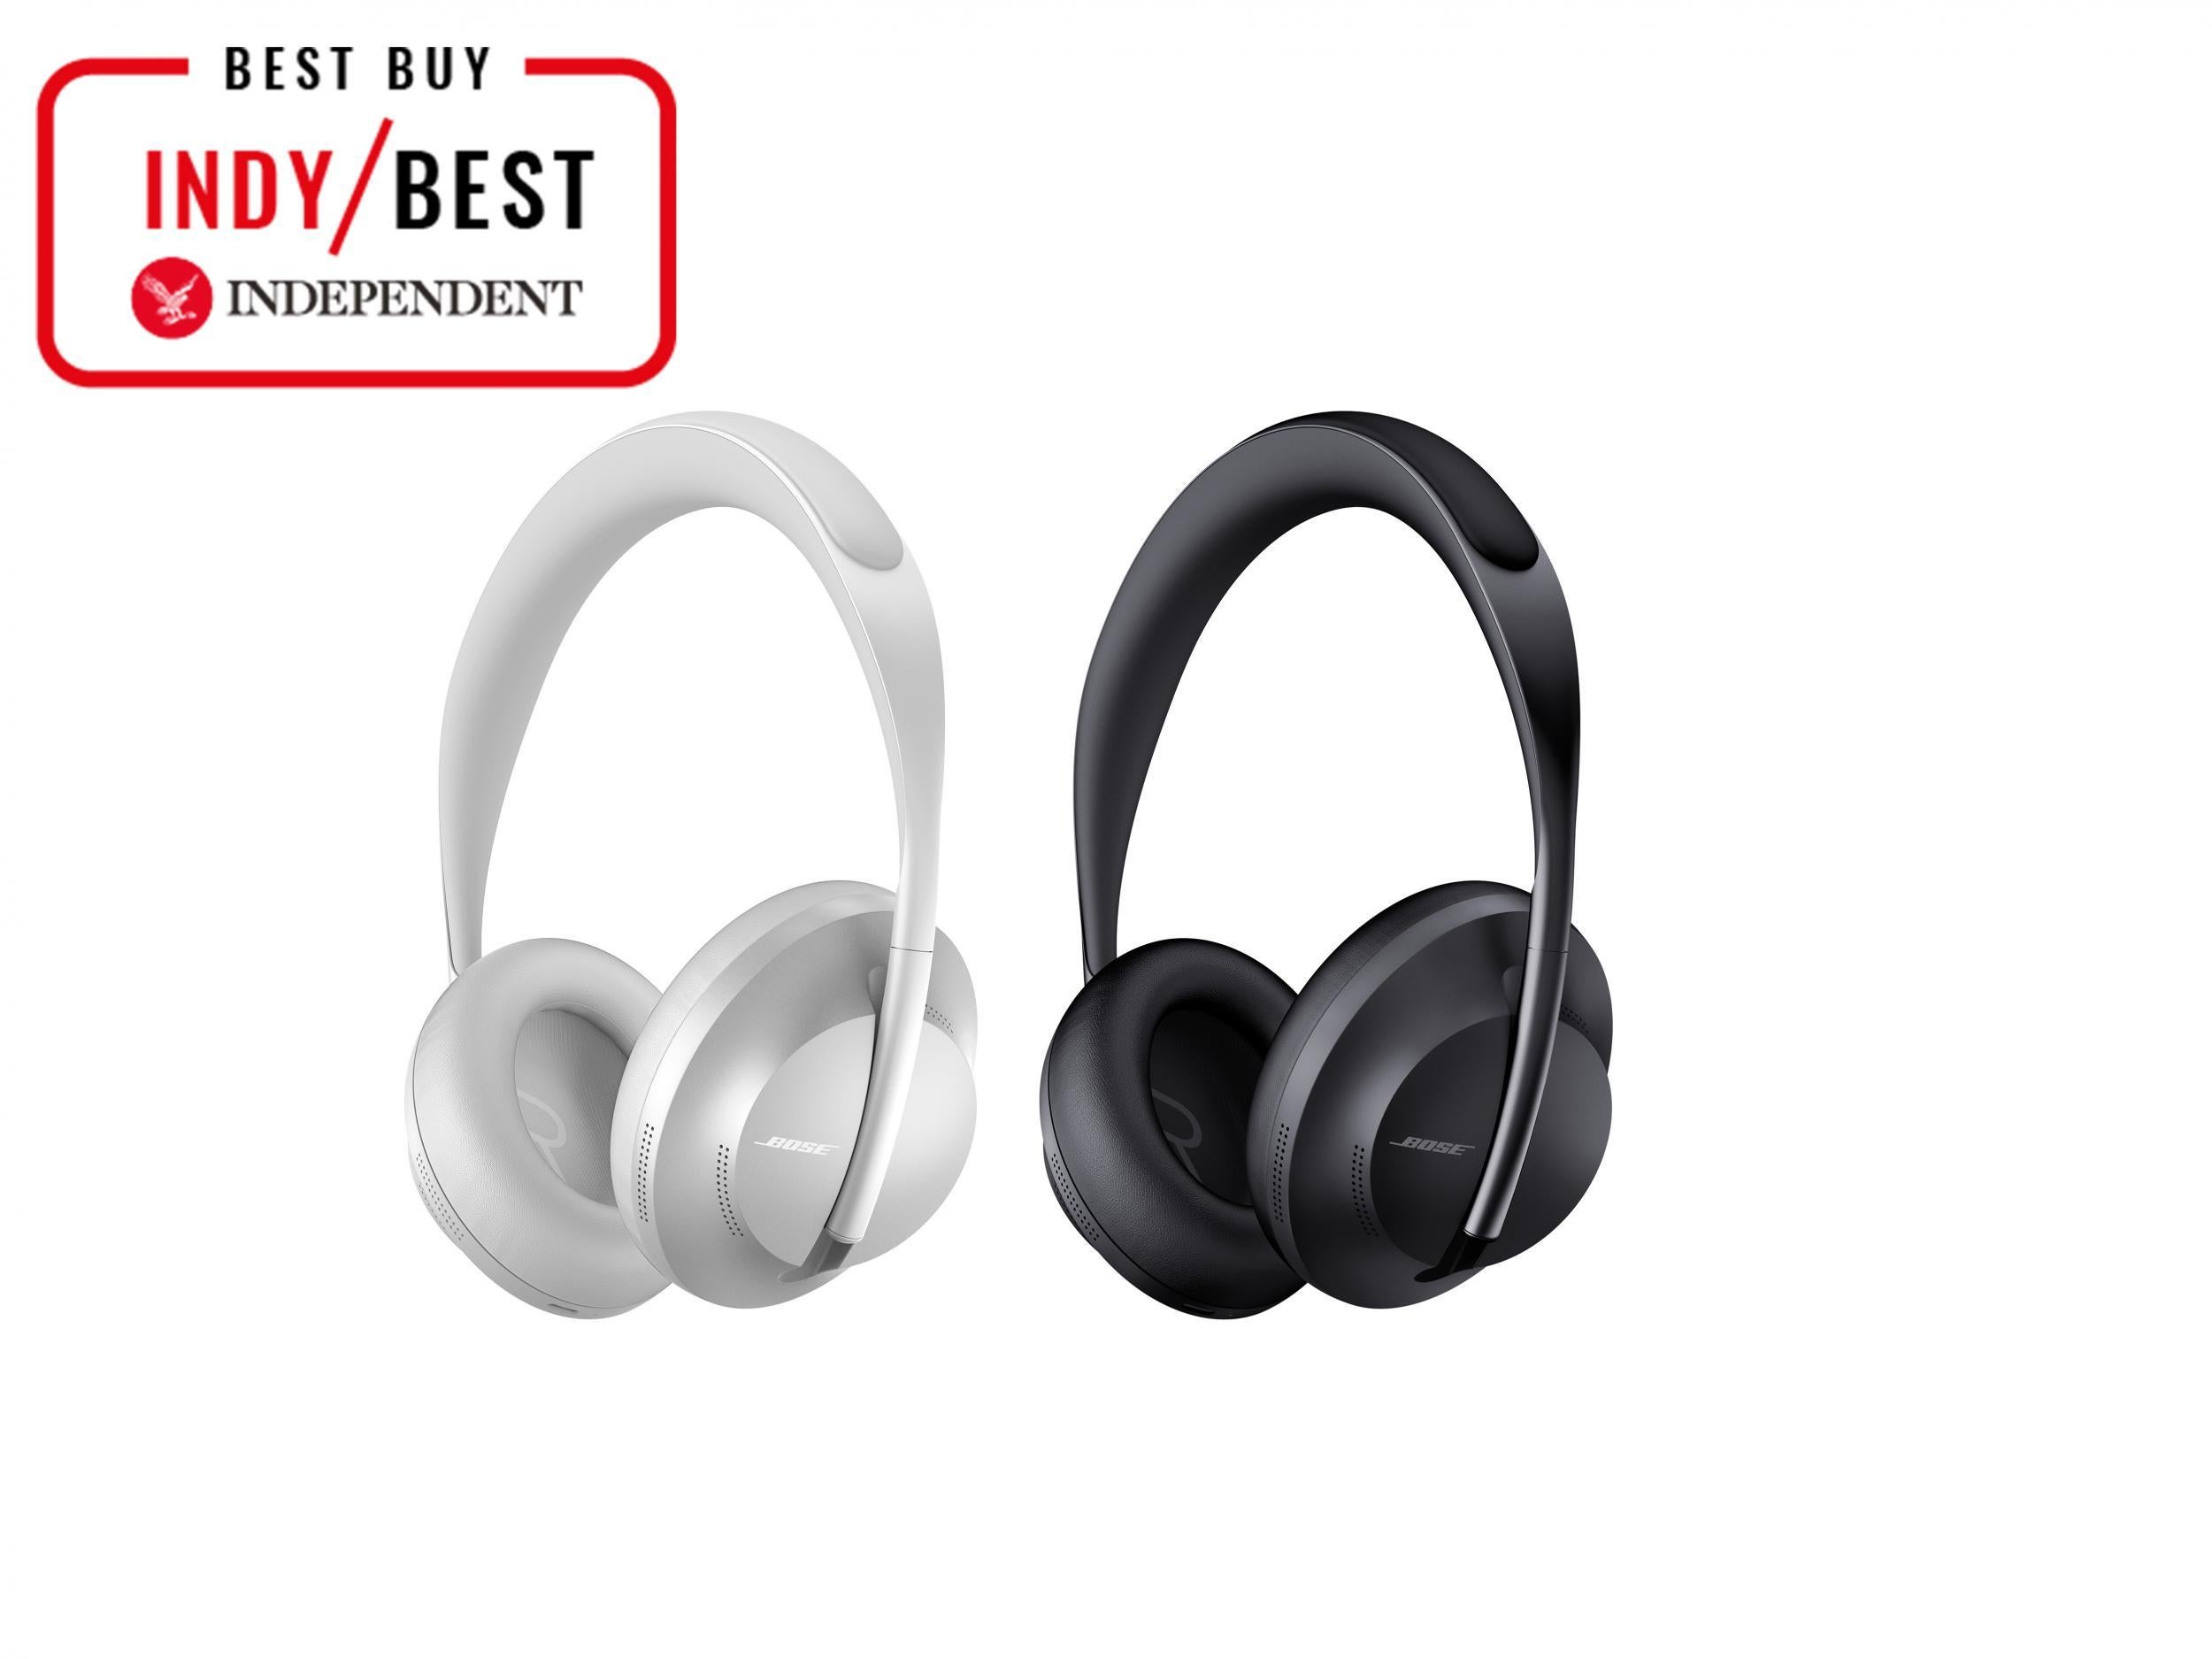 Shut out the world with a pair of noise-cancelling headphones, perfect for sunbathing sessions and long car rides